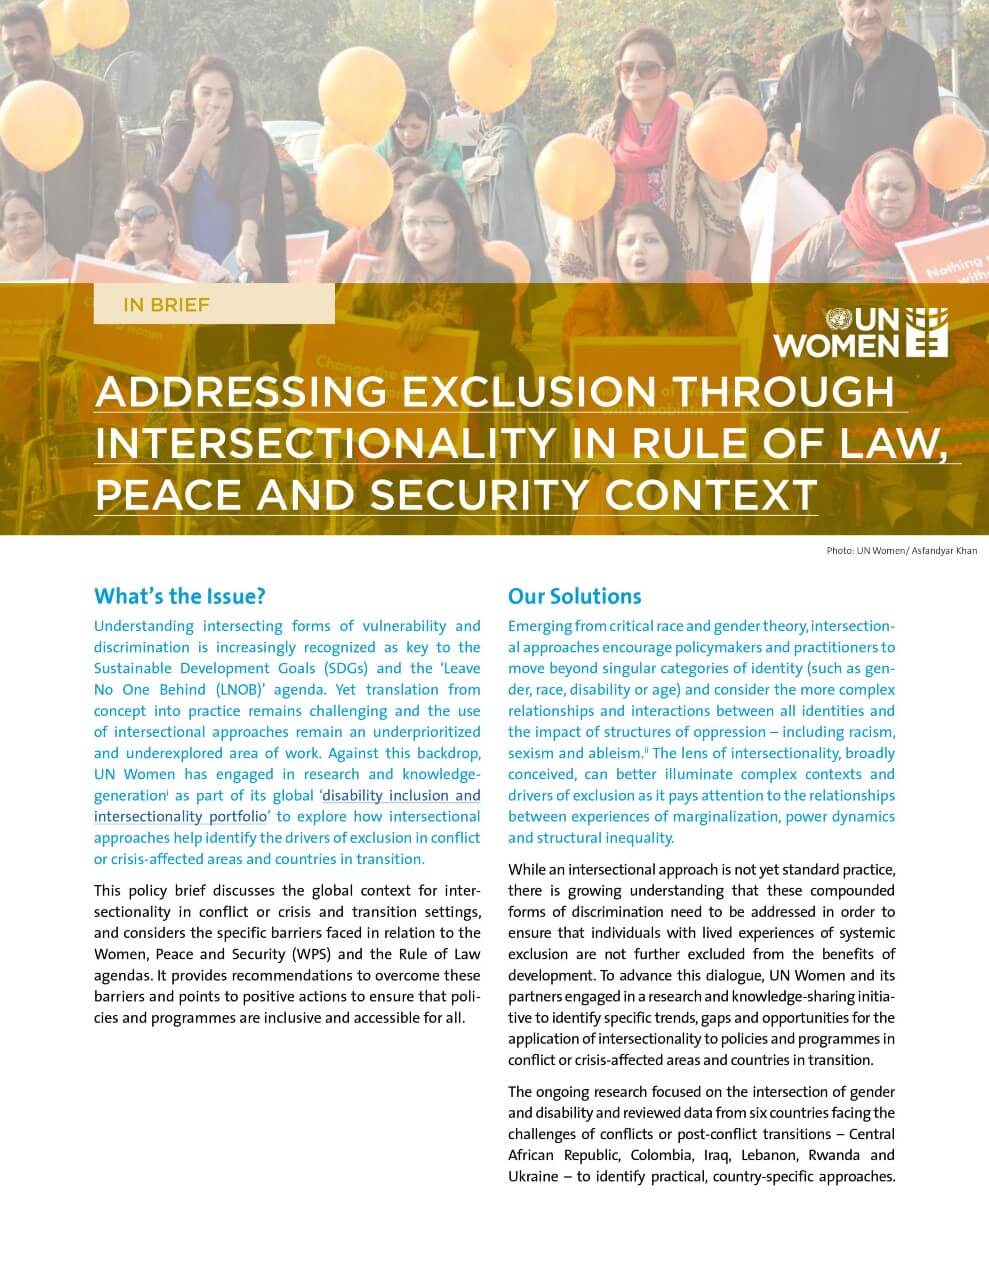 Addressing exclusion through intersectionality in rule of law, peace, and security context